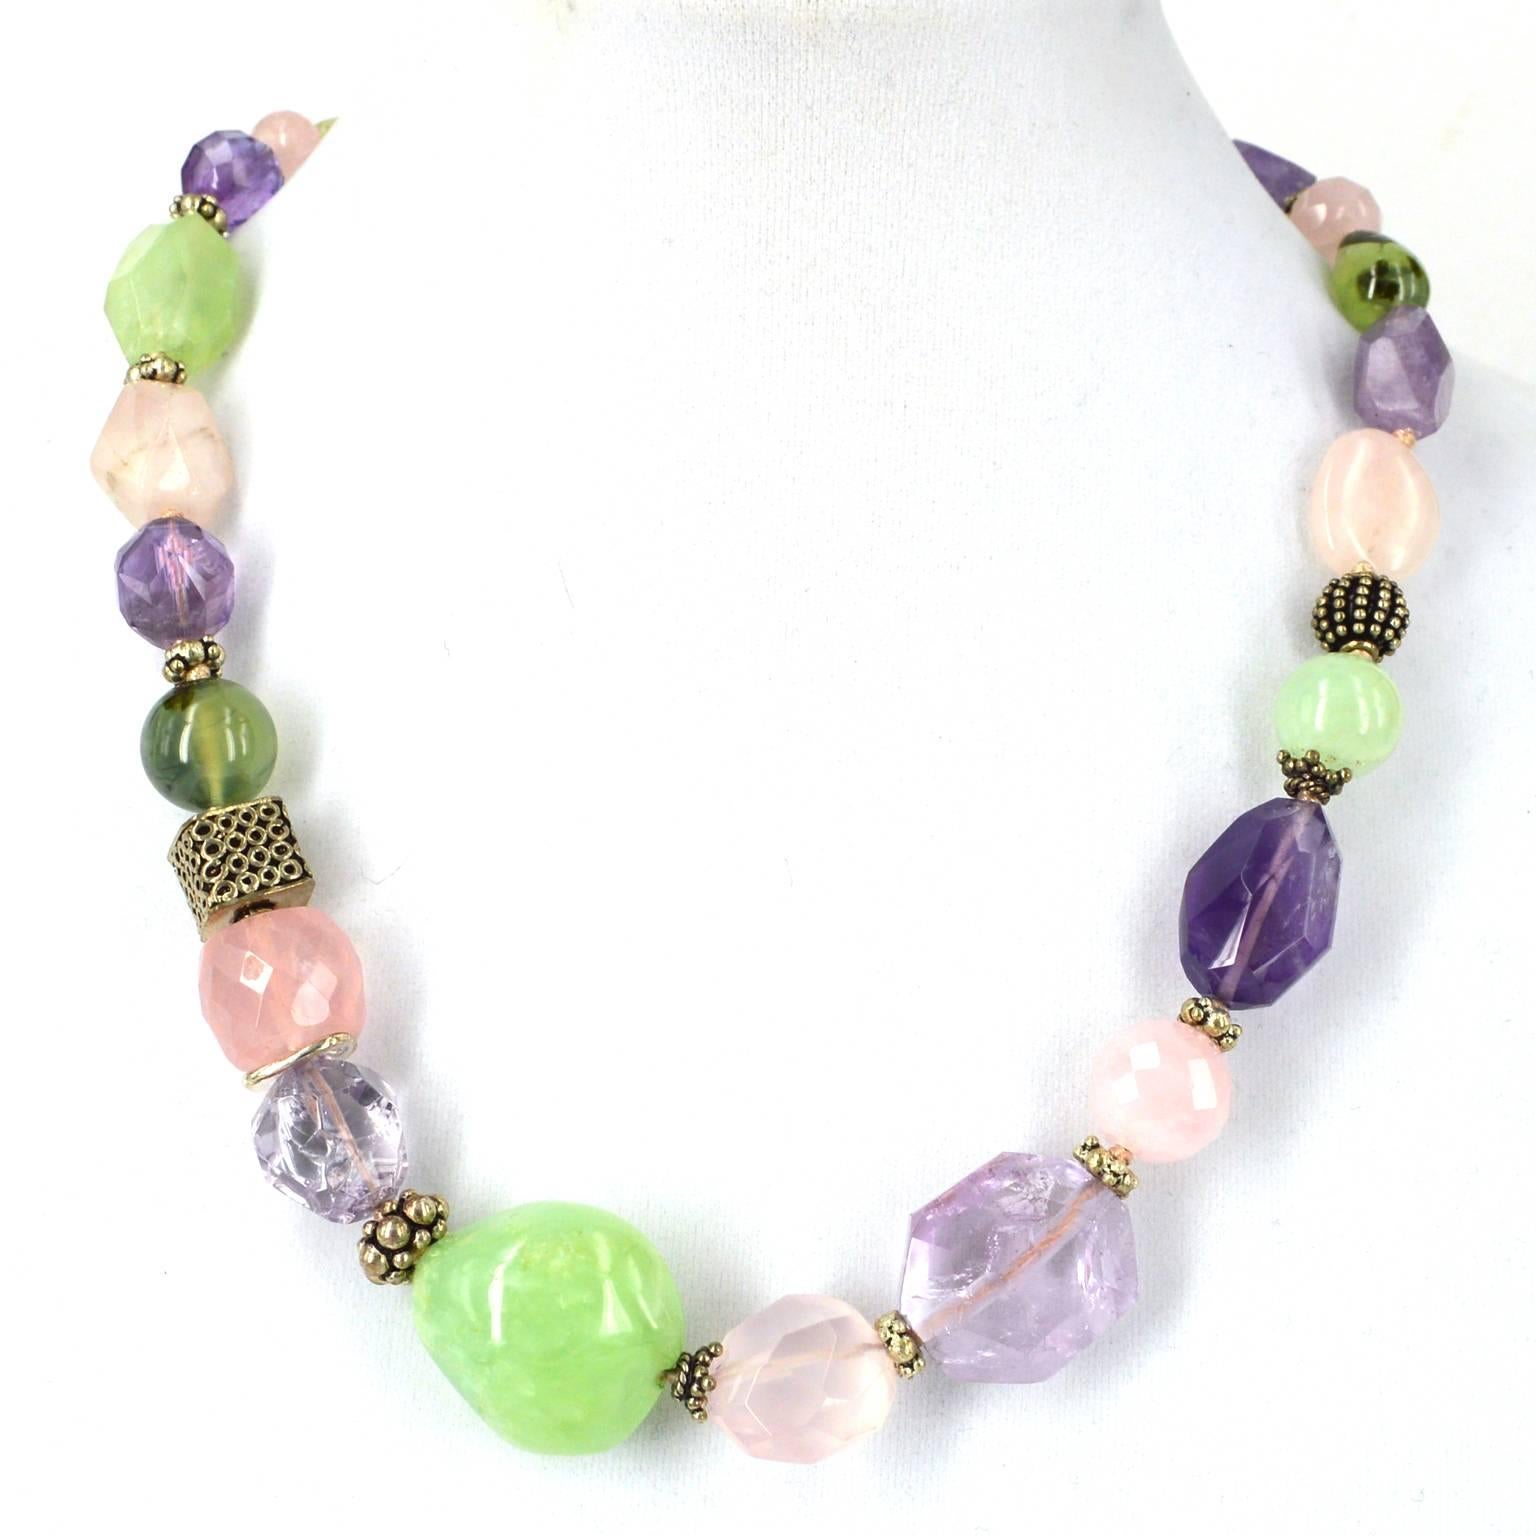 Soft natural Faceted and Polished necklace with Amethyst, Rose Quartz and Prehnite spaced with solid Sterling silver beads and spacers 51cm knotted necklace.  Largest bead is Prehnite bead measuring 24x26mm.

